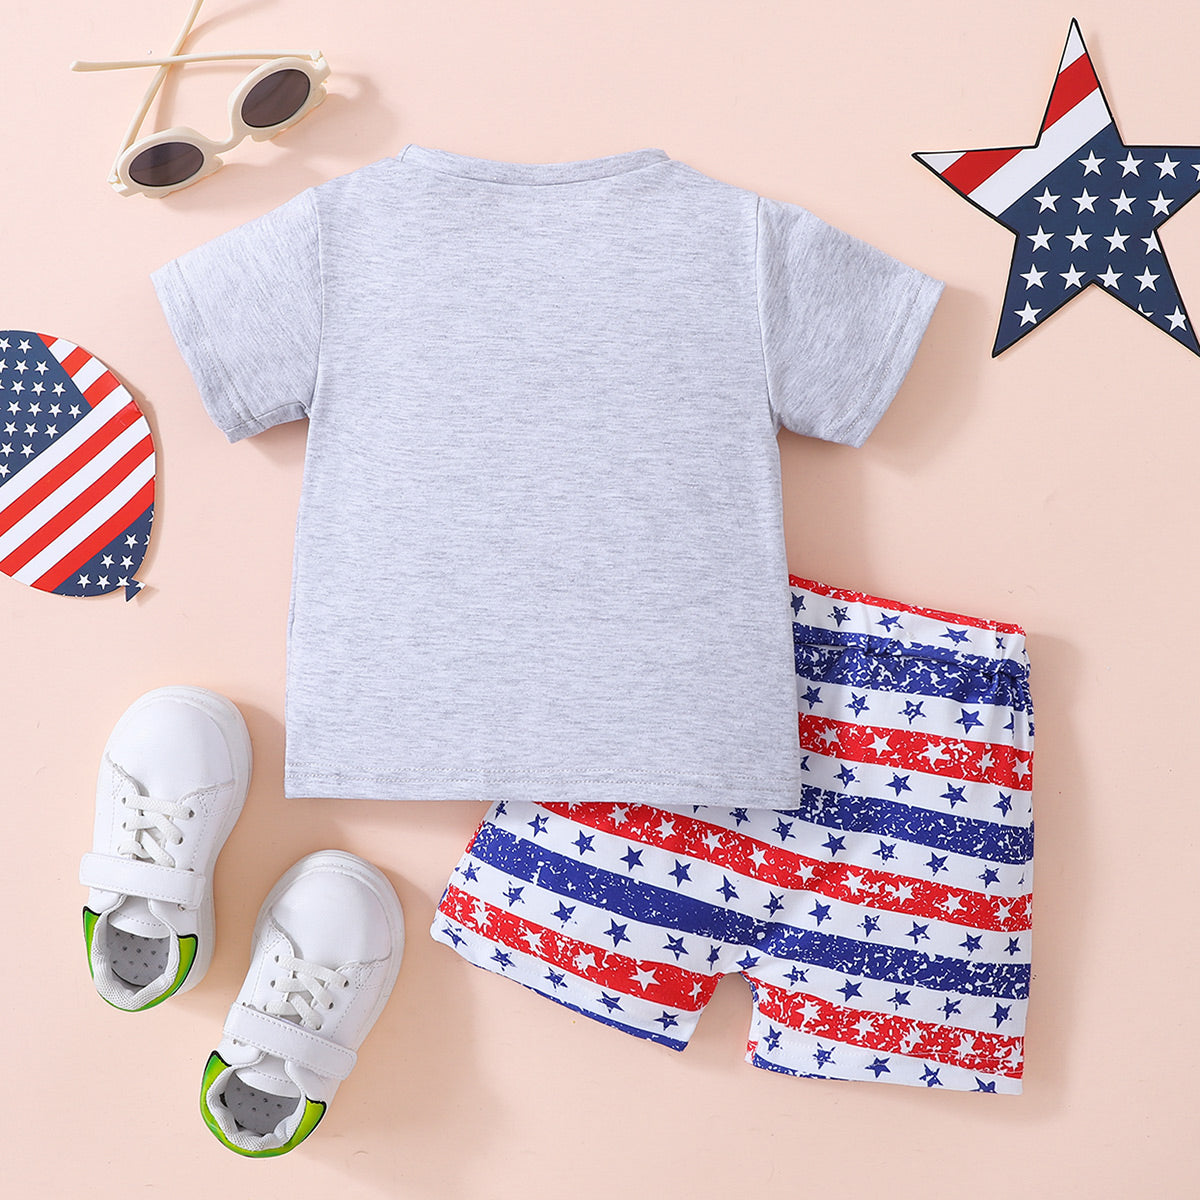 Children’s Girls Boys USA Graphic Tee and Star and Stripe Shorts Set